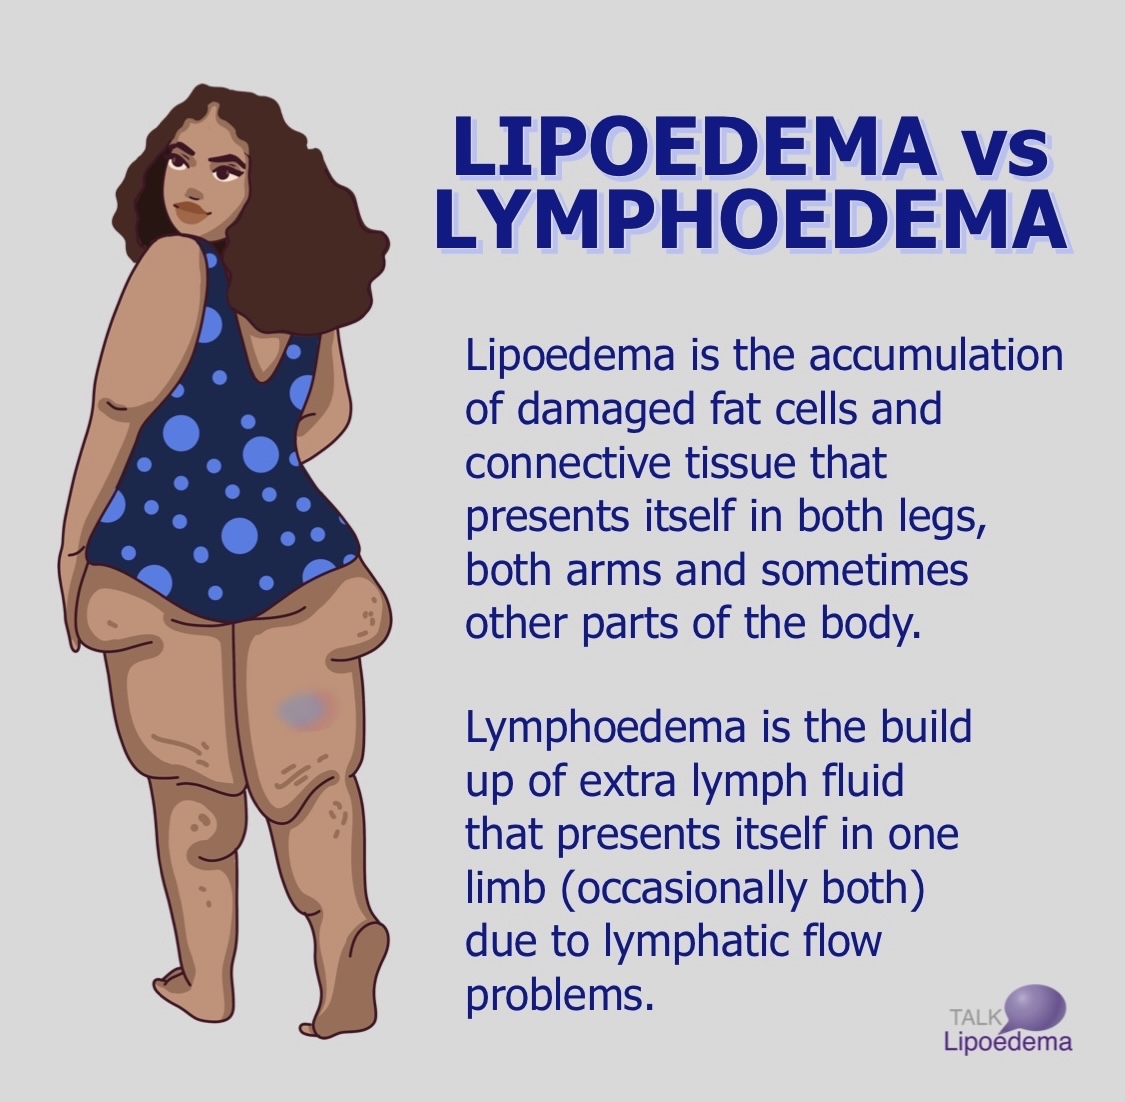 TalkLipoedema on X: Lipoedema patients can also suffer with  #lipolymphoedema which means you will get swelling of limbs too. With the  assistance of compression garments you can alleviate symptoms  #talklipoedema #lipoedema #lipedema #